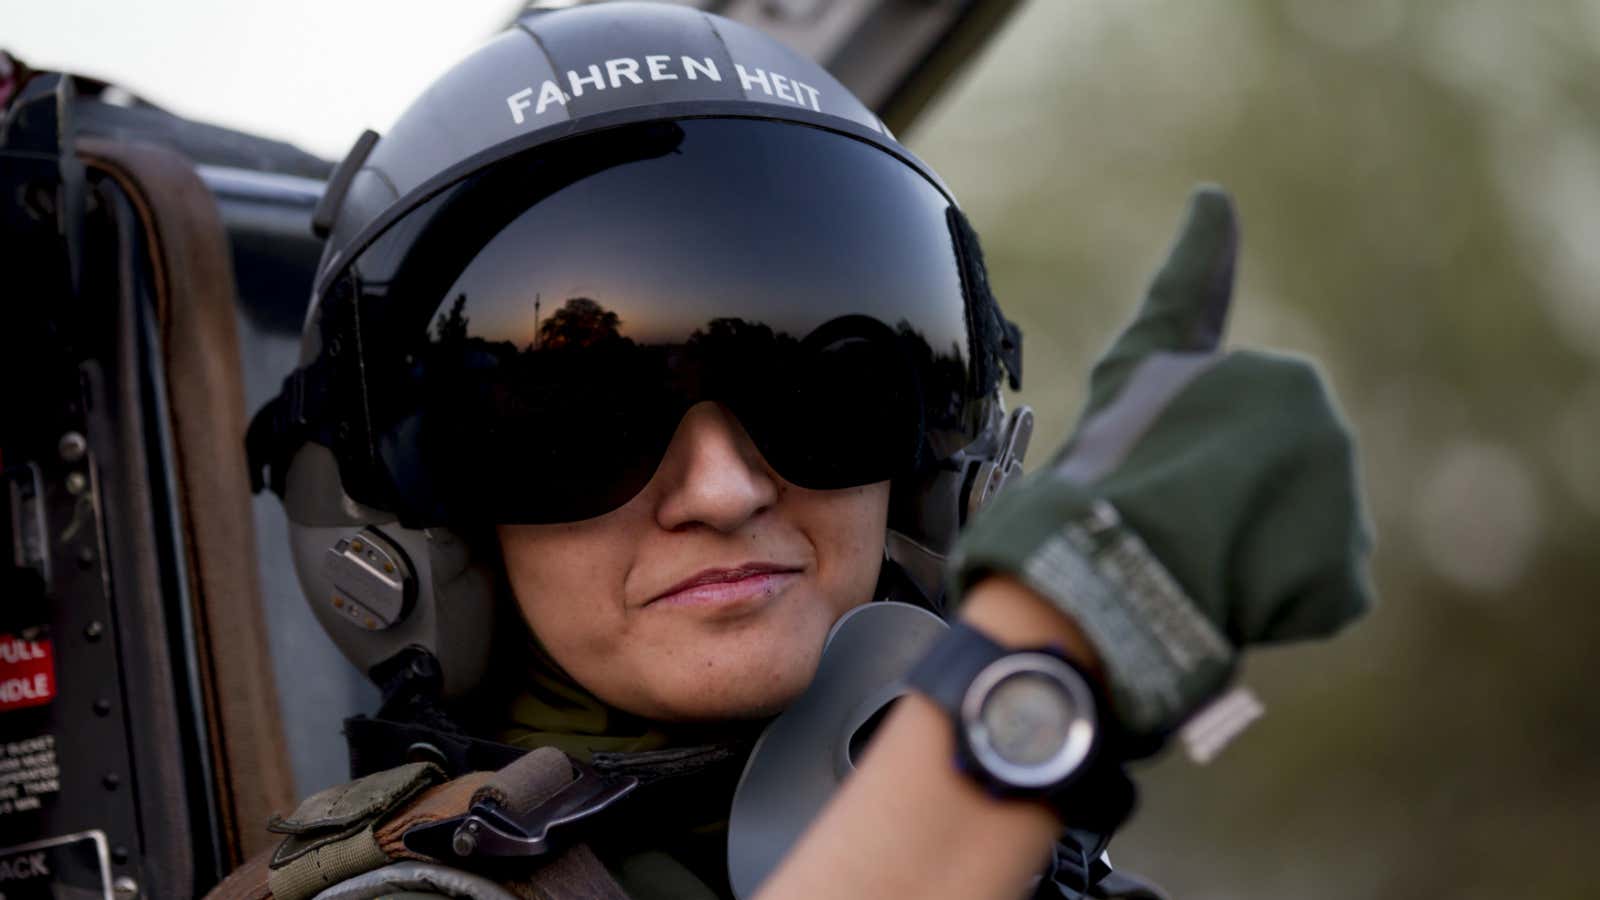 Many air forces already allow women to fly fighter planes.